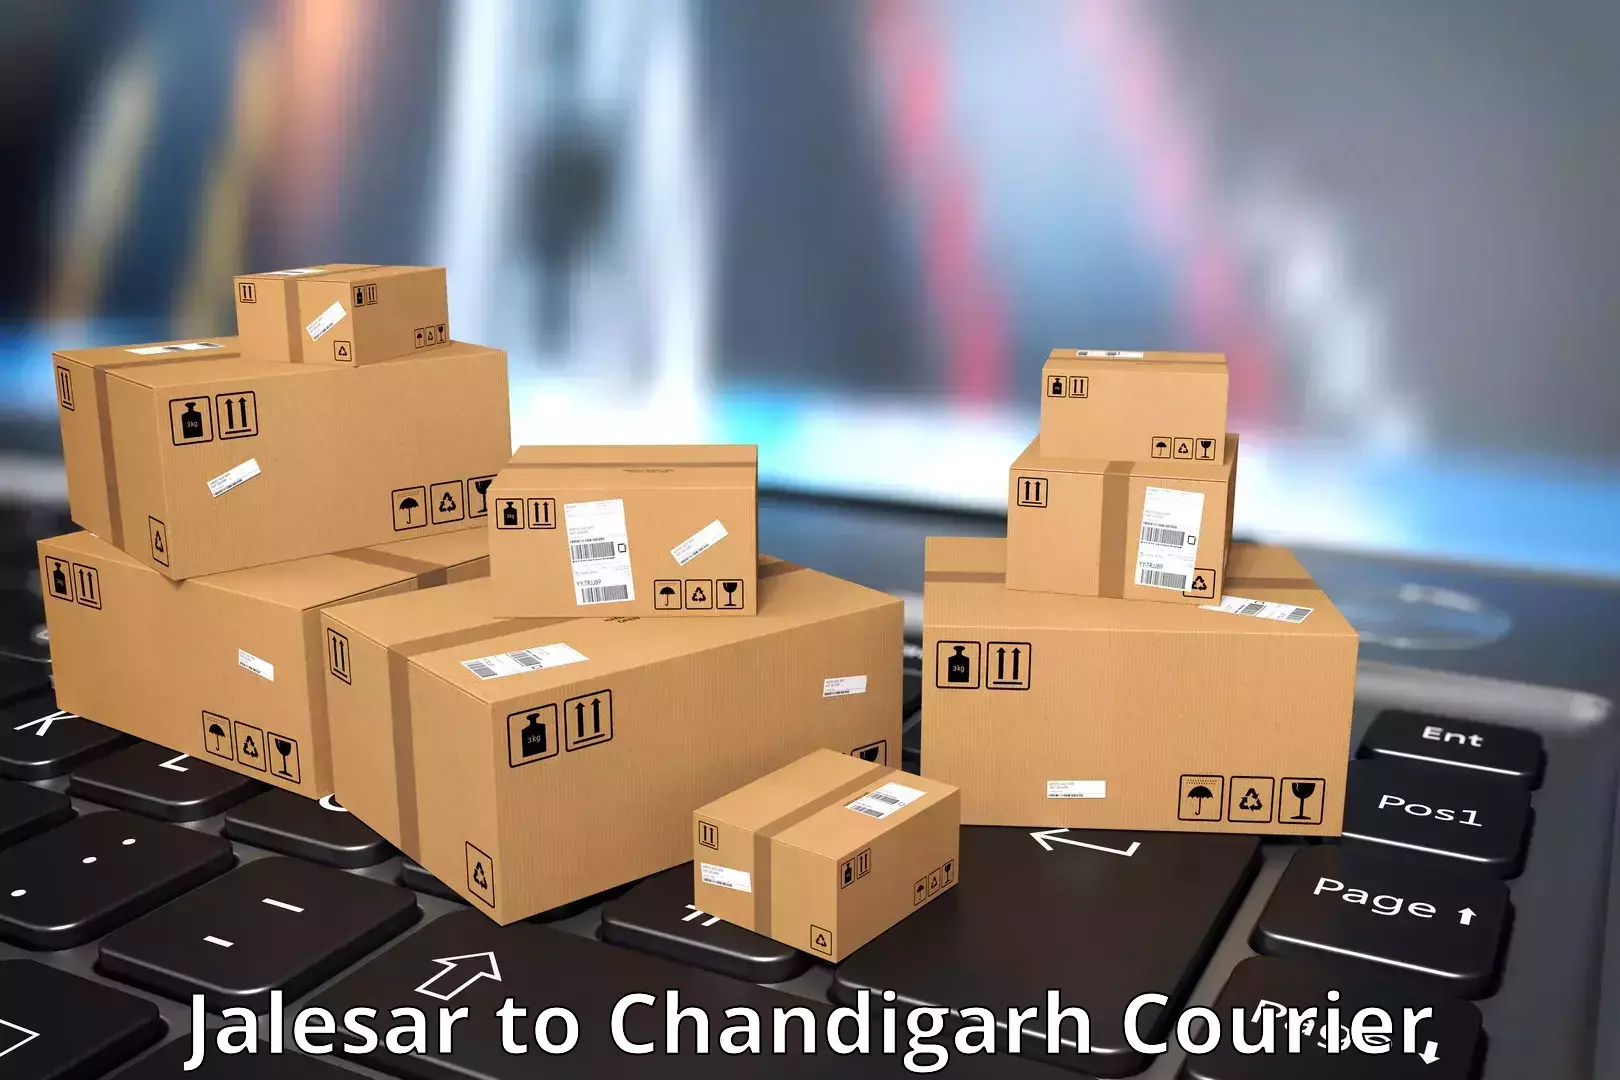 Nationwide parcel services Jalesar to Chandigarh